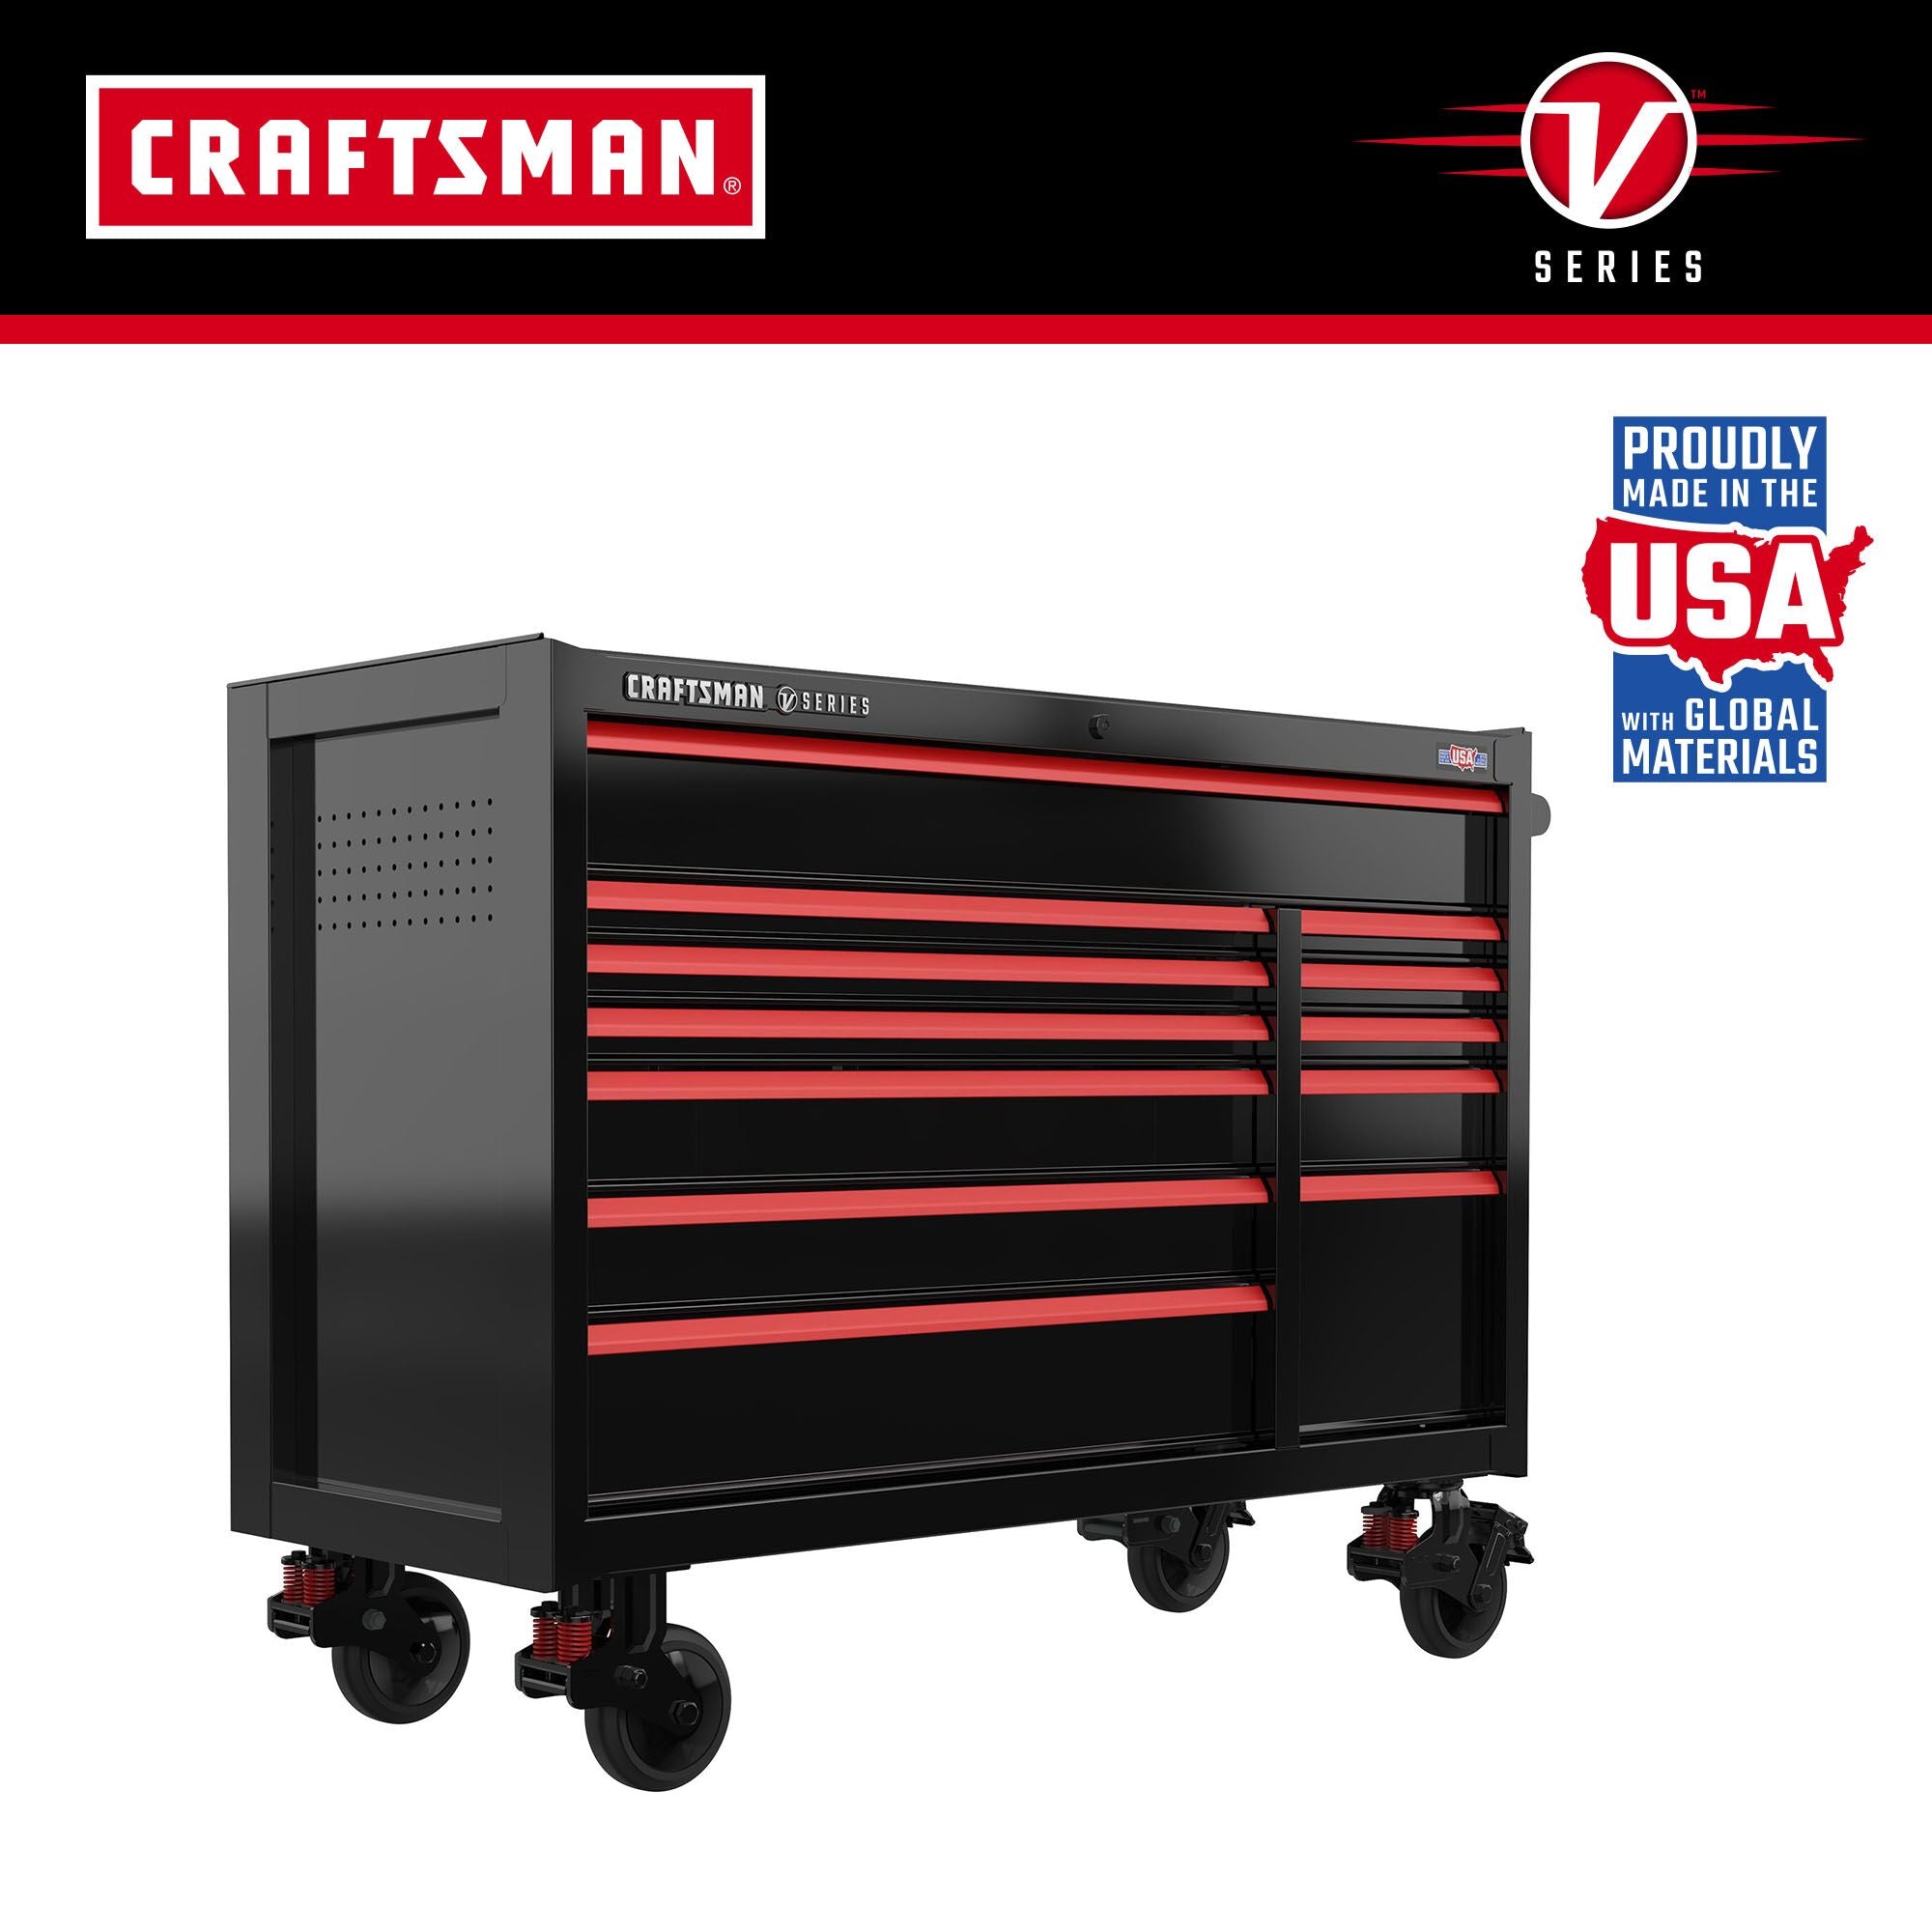 CRAFTSMAN V-Series 52-inch cabinet with V-Series and Made in the USA logos